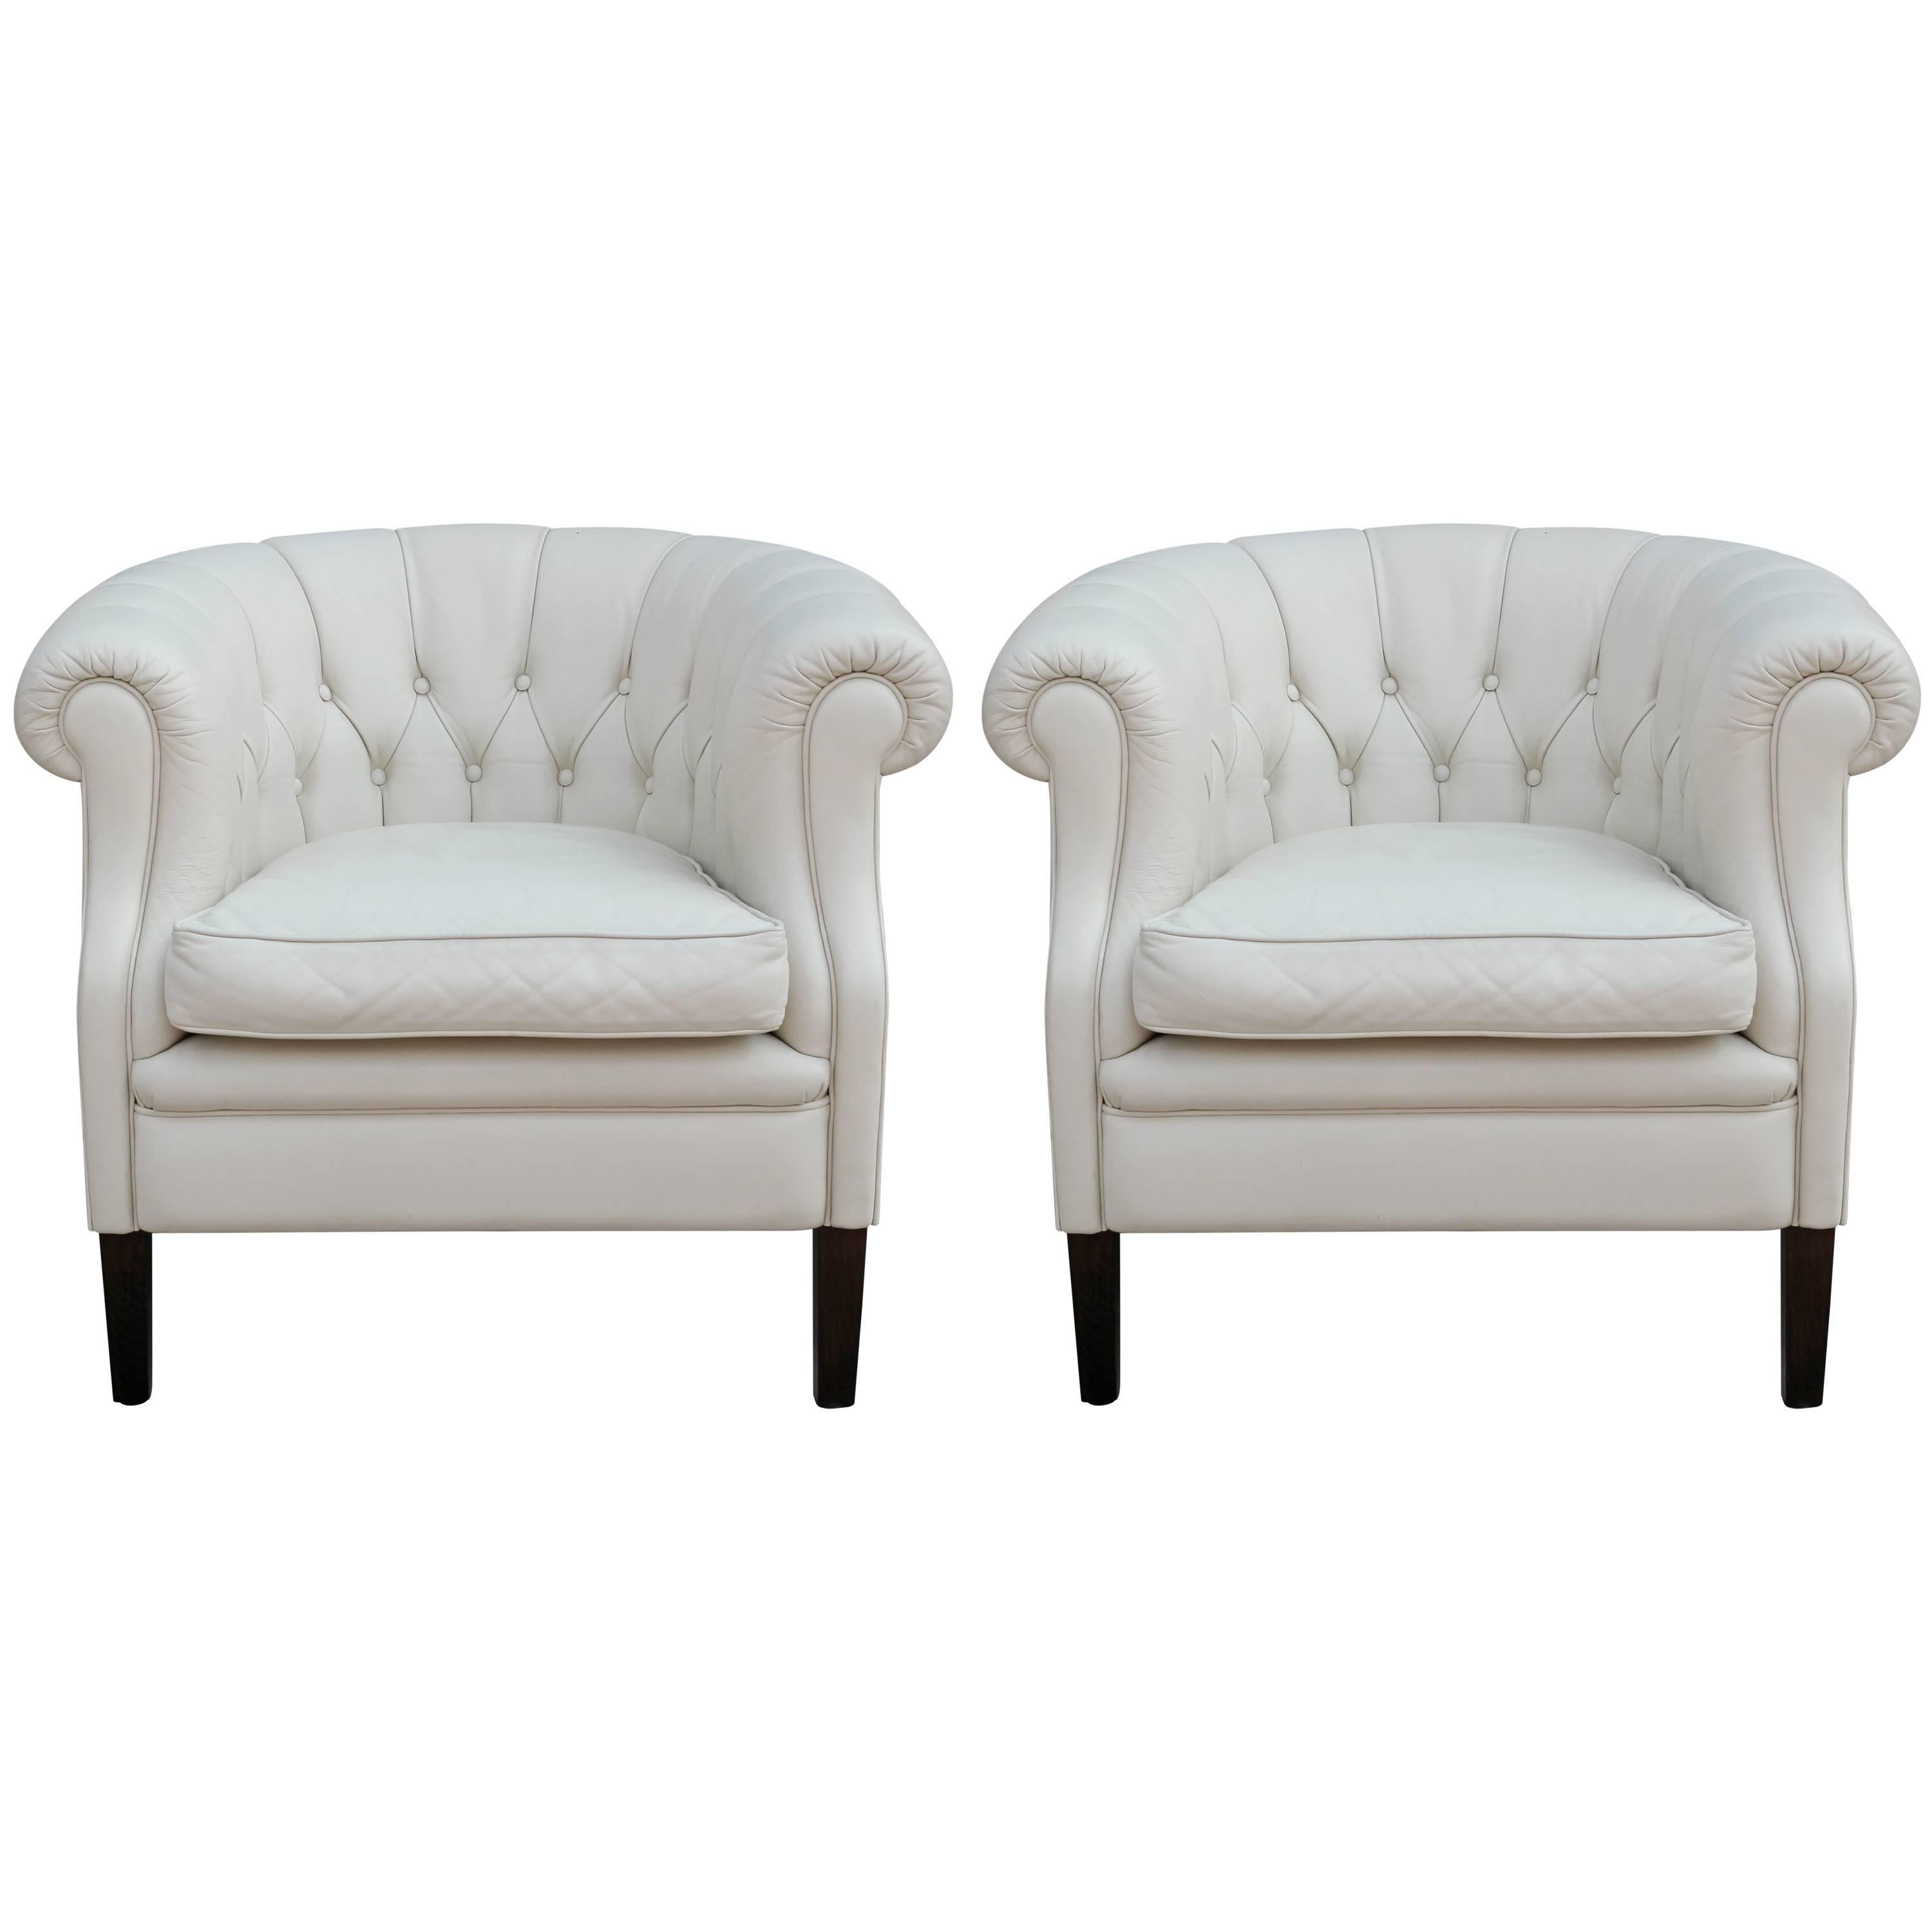 Pair of Hollywood Regency White Leather Tufted Chesterfield Style Lounge Chairs